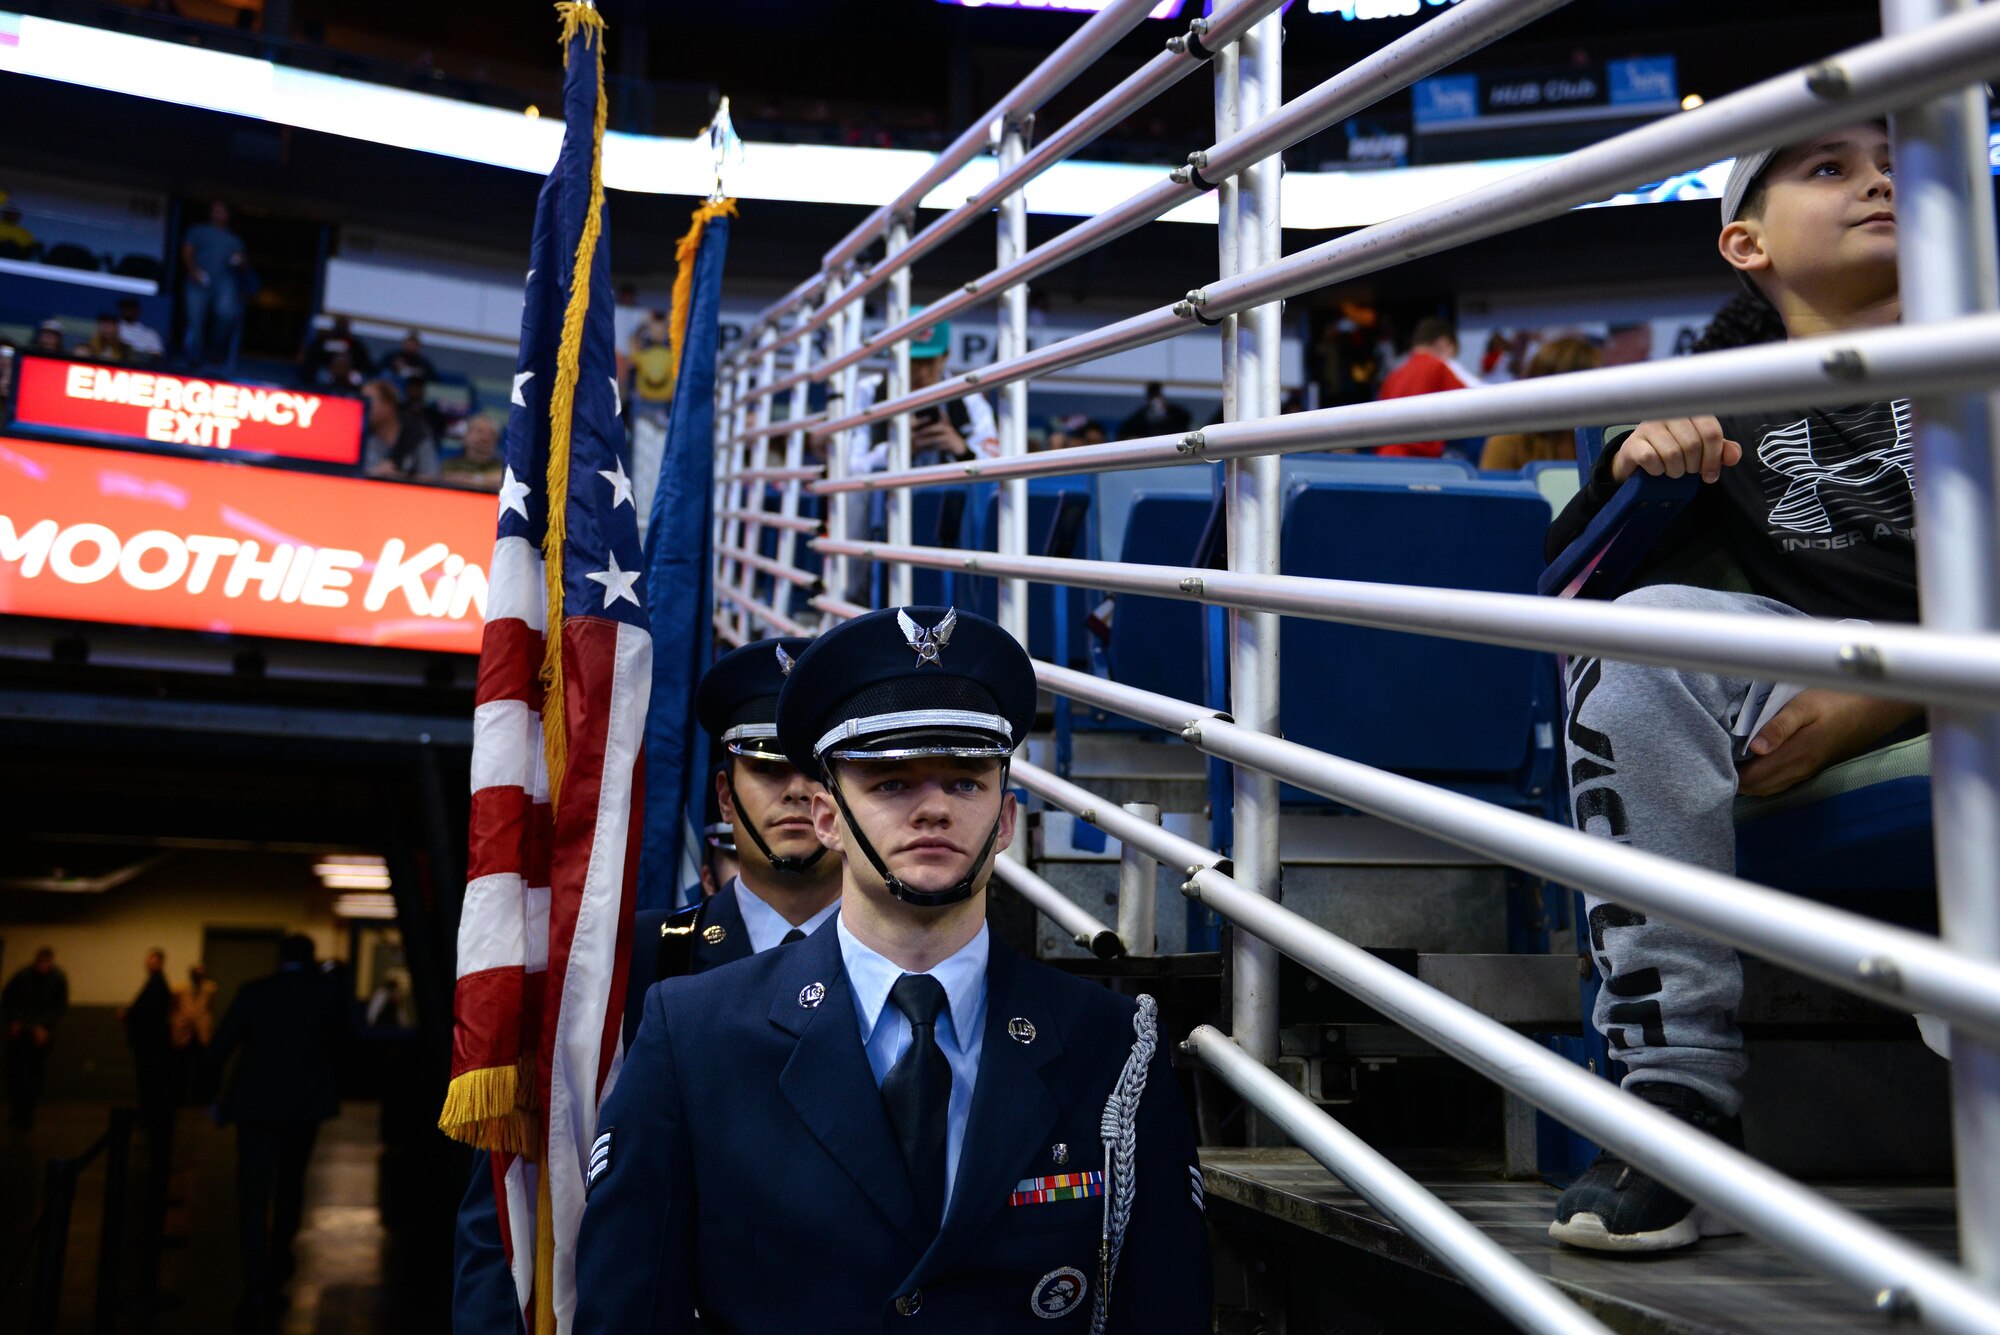 Senior Airman Terry Durbin, Keesler Honor Guard member, waits to march onto the court at a New Orleans Pelicans NBA game at the Smoothie King Center, March 3, 2017, in New Orleans. The Keesler Honor Guard posted the colors prior to the game. The Keesler Honor Guard performs hundreds of ceremonial details across Louisiana and Mississippi each year, including funerals, ceremonies, sporting events and parades. (U.S. Air Force photo by Senior Airman Duncan McElroy)